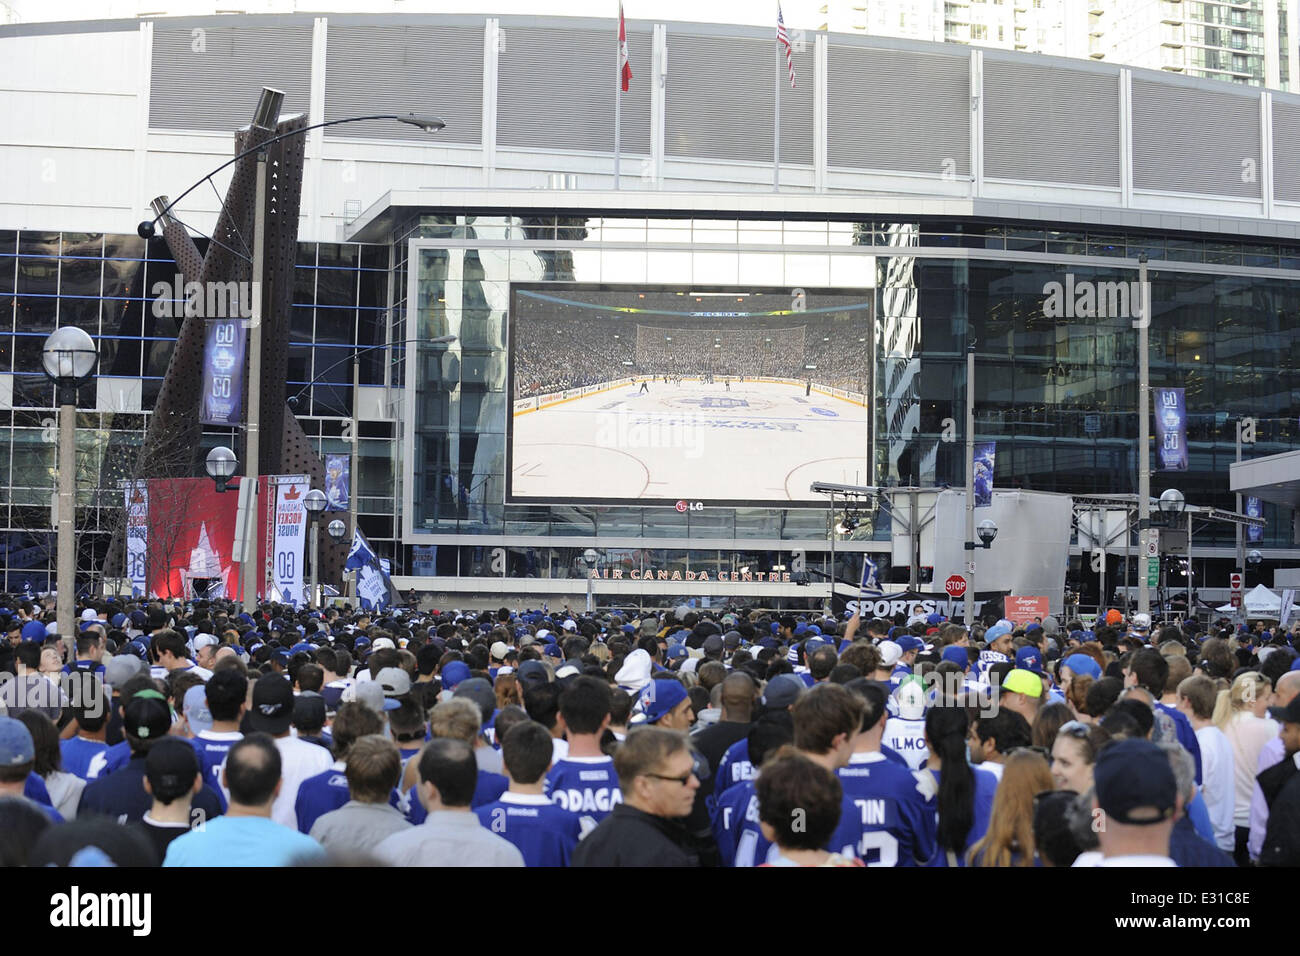 Thousands of Toronto Maple Leafs fans packed the Maple Leafs Square to watch the hockey playoff game on giant TV screen outside the Air Canada Centre